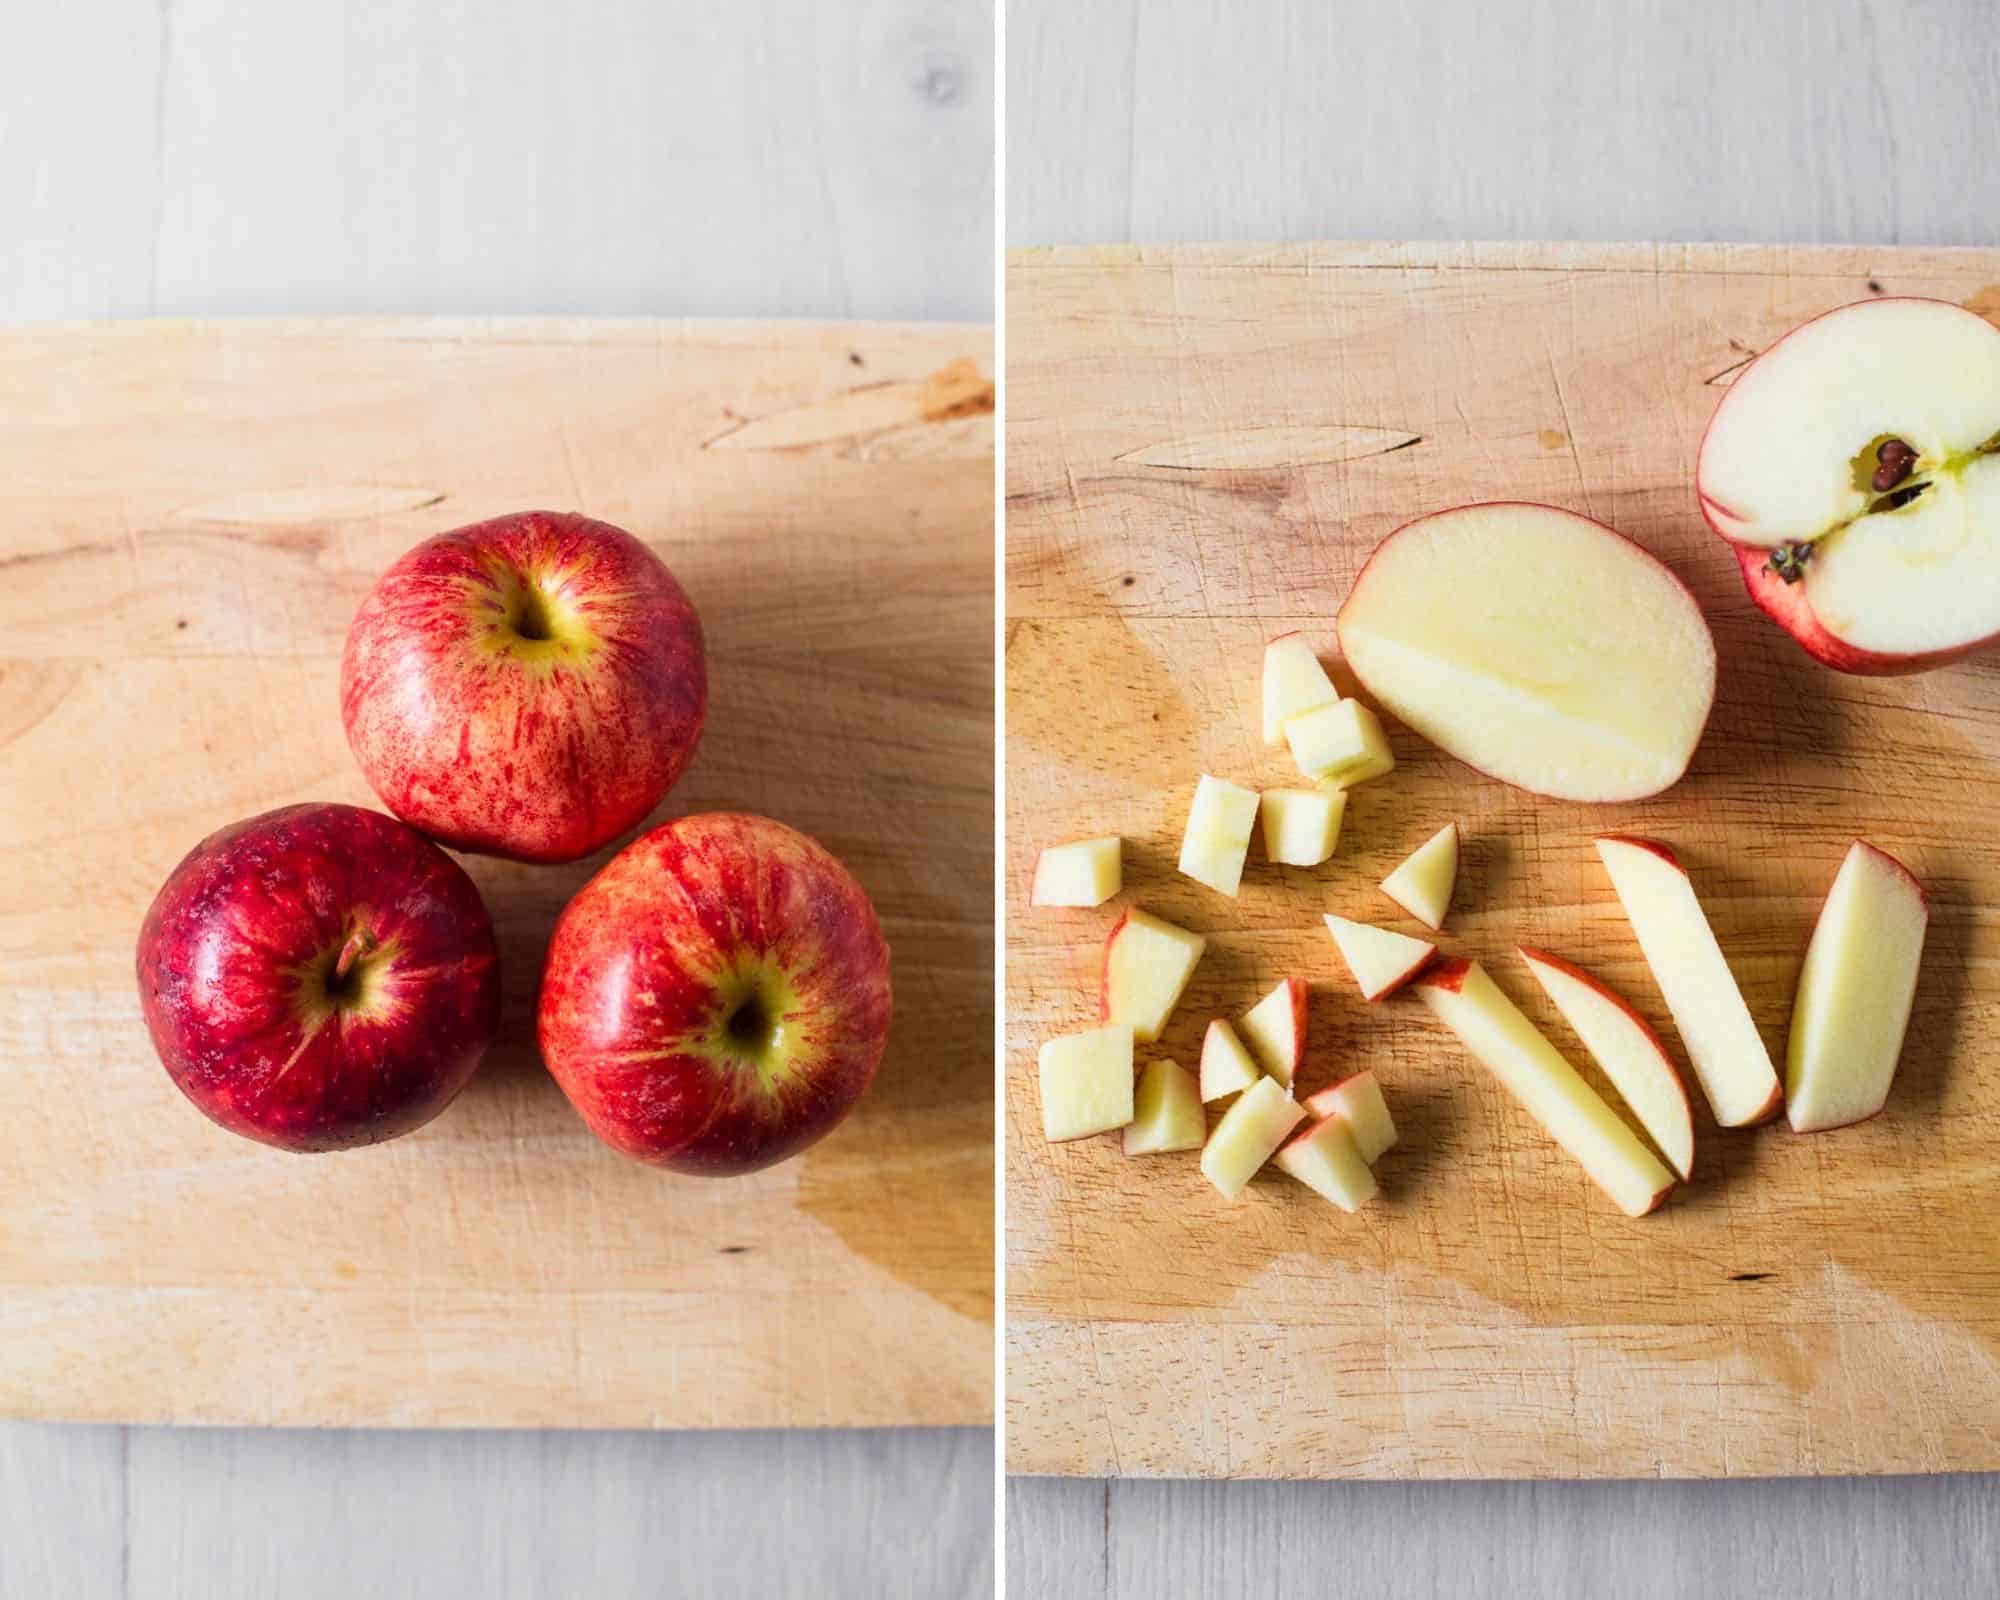 Chopping pink lady apples on wooden chopping board.